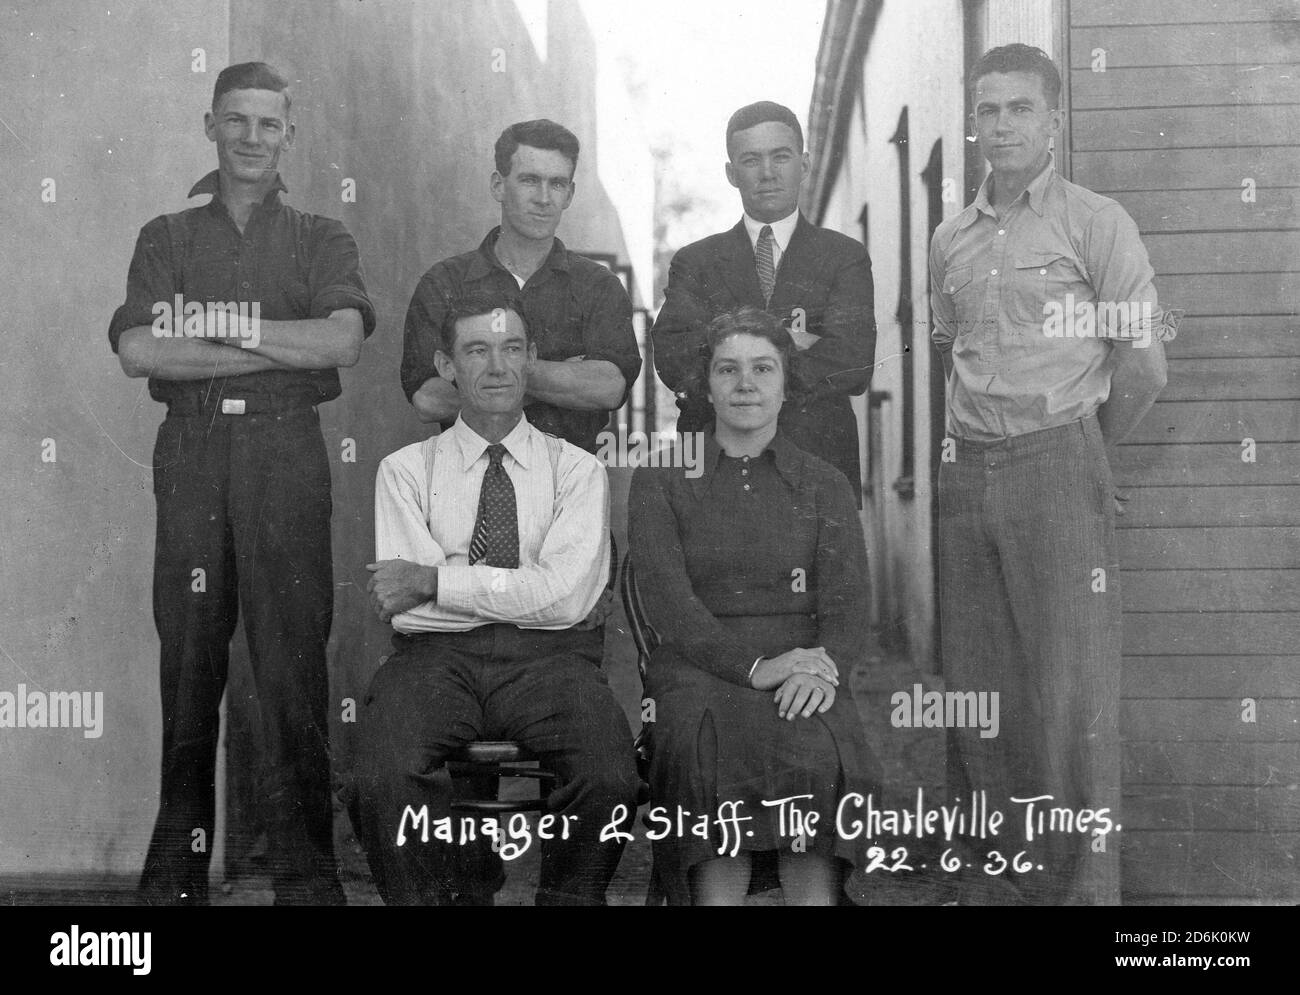 Staff of the Charleville Times newspaper pose for the camera, June 22, 1936. Editor John Gillard McKechnie at front left. From the McKechnie family collection. Stock Photo